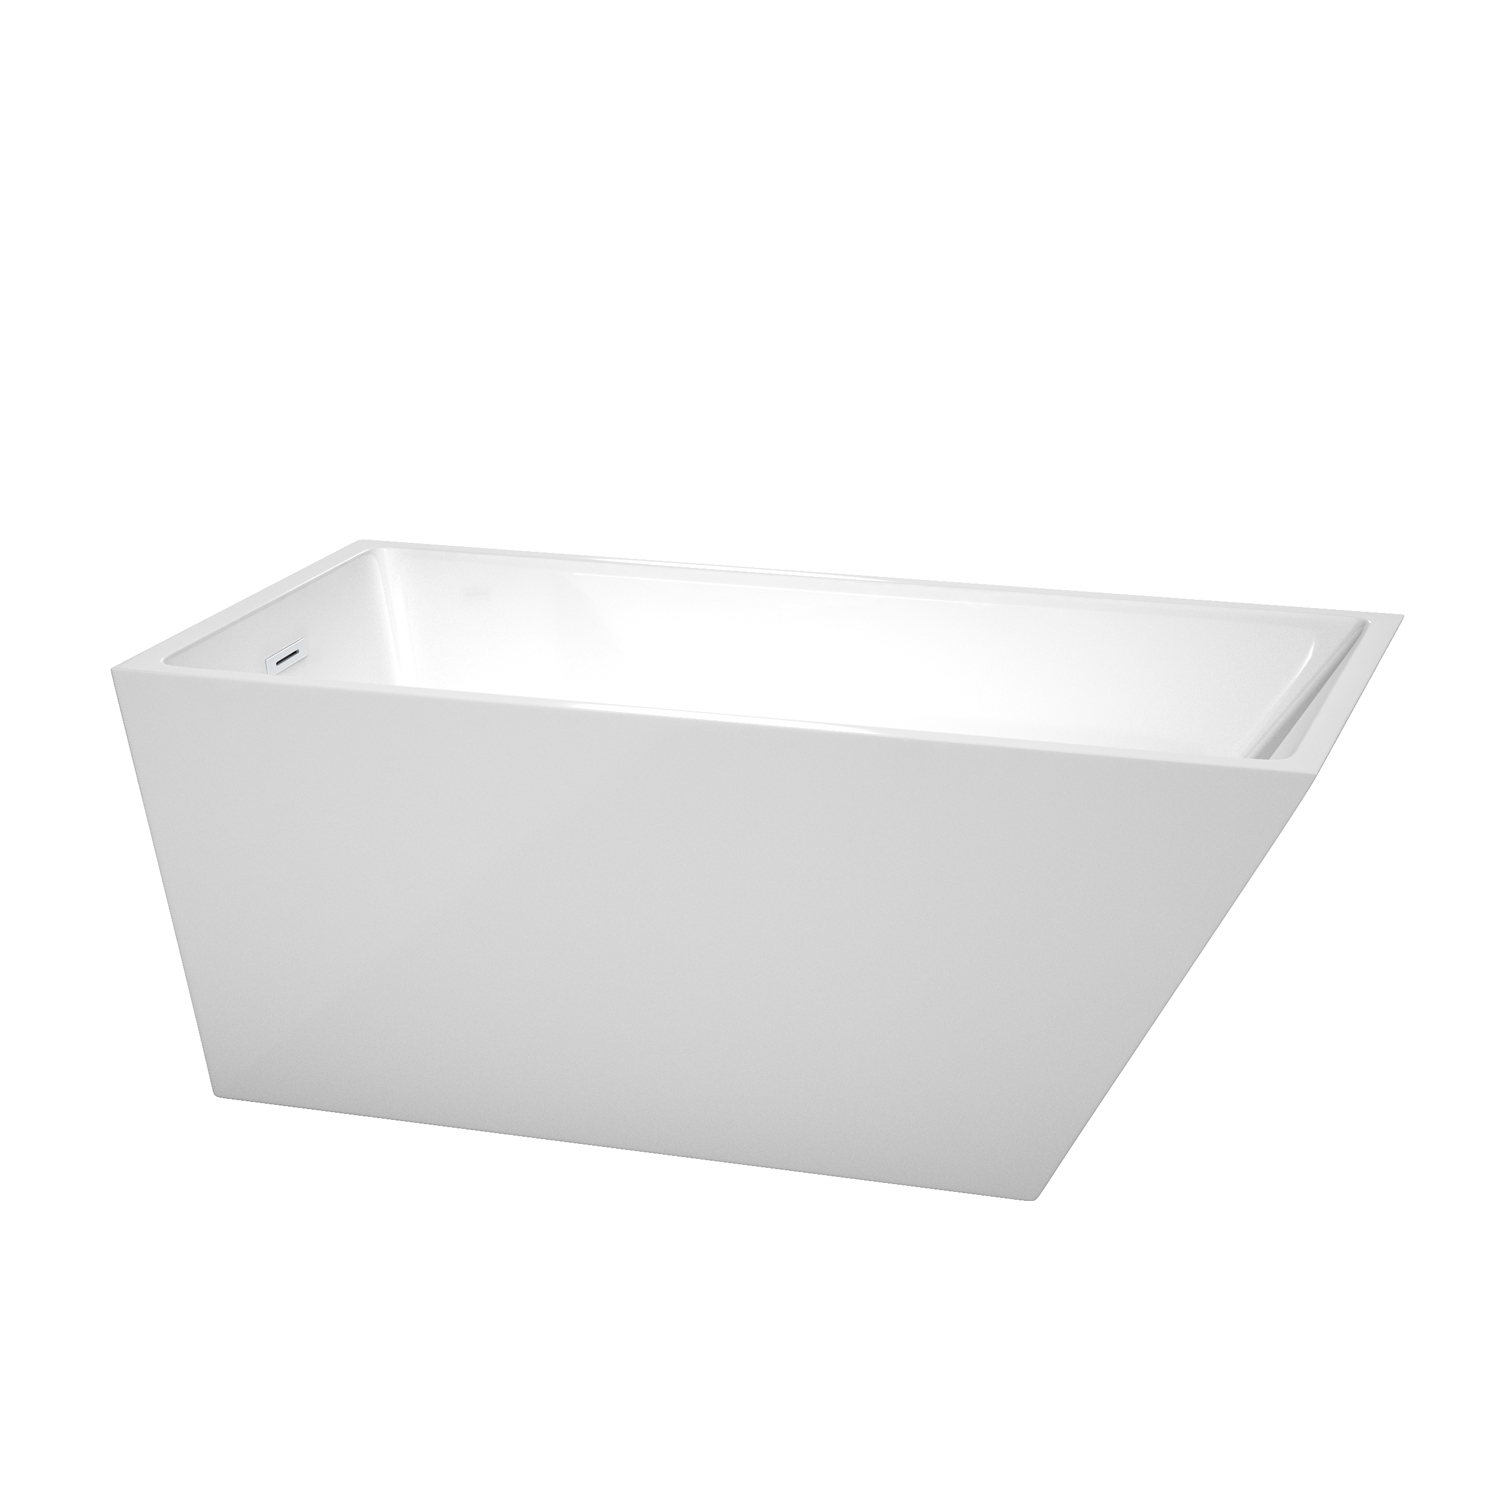 59" Freestanding Bathtub in White with Shiny White Drain and Overflow Trim Finish